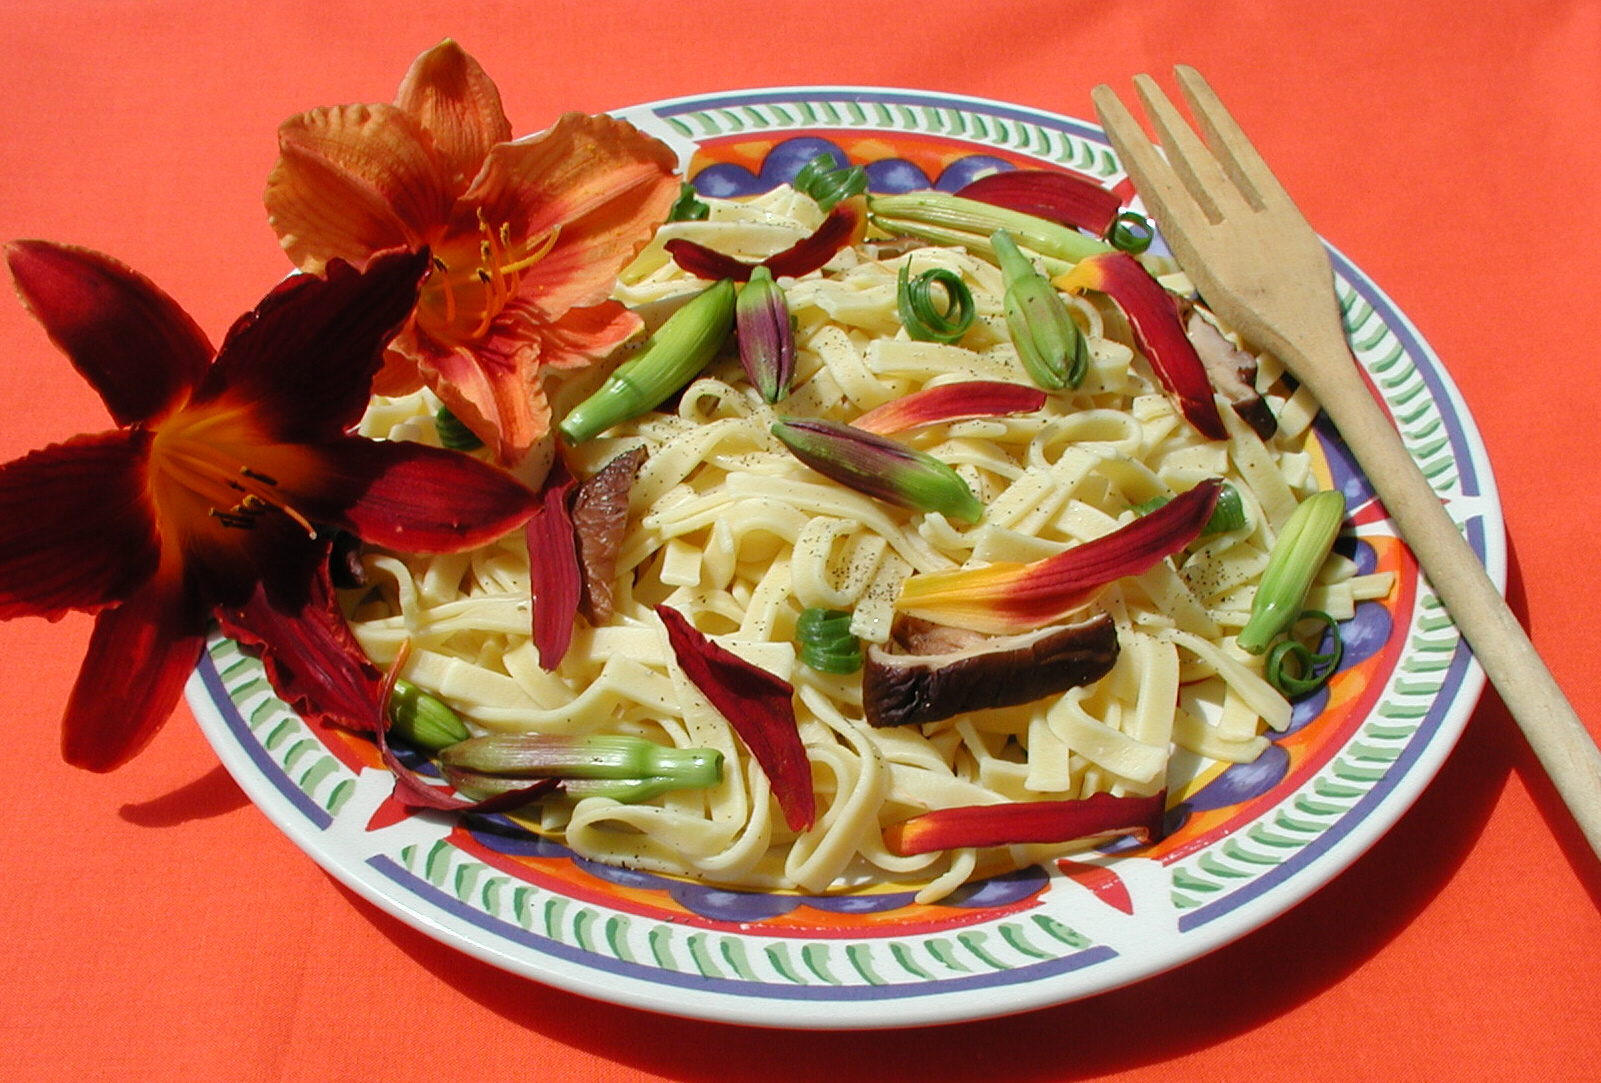 Open A meatless stir-fried daylily dish using flower buds and petals. Photo by Michele Warmund.